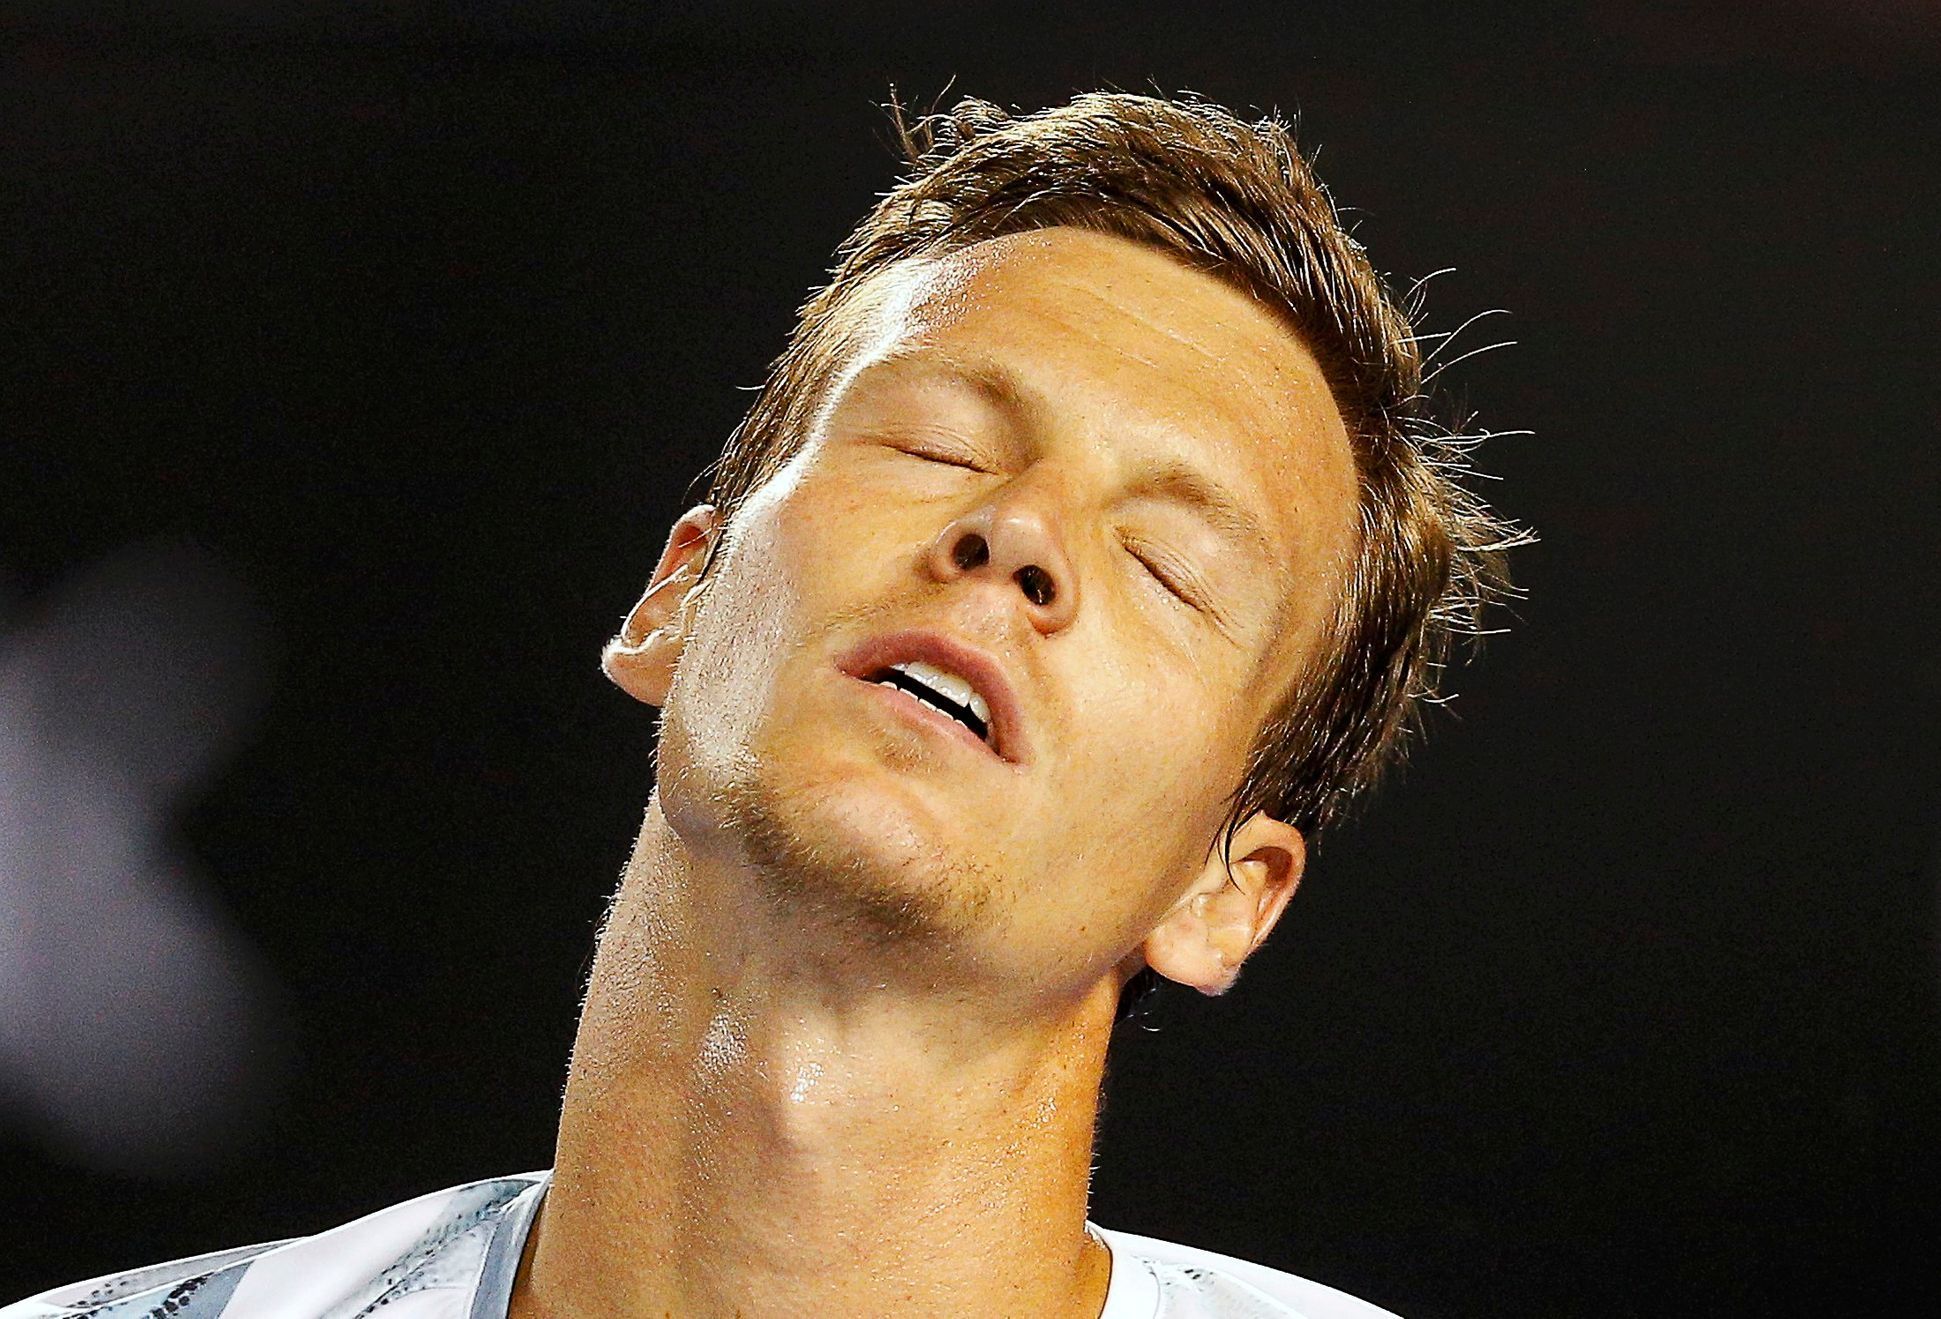 Berdych of Czech Republic reacts after missing a shot to Murray of Britain during men's singles semi-final match at the Australian Open 2015 tennis tournament in Melbourne